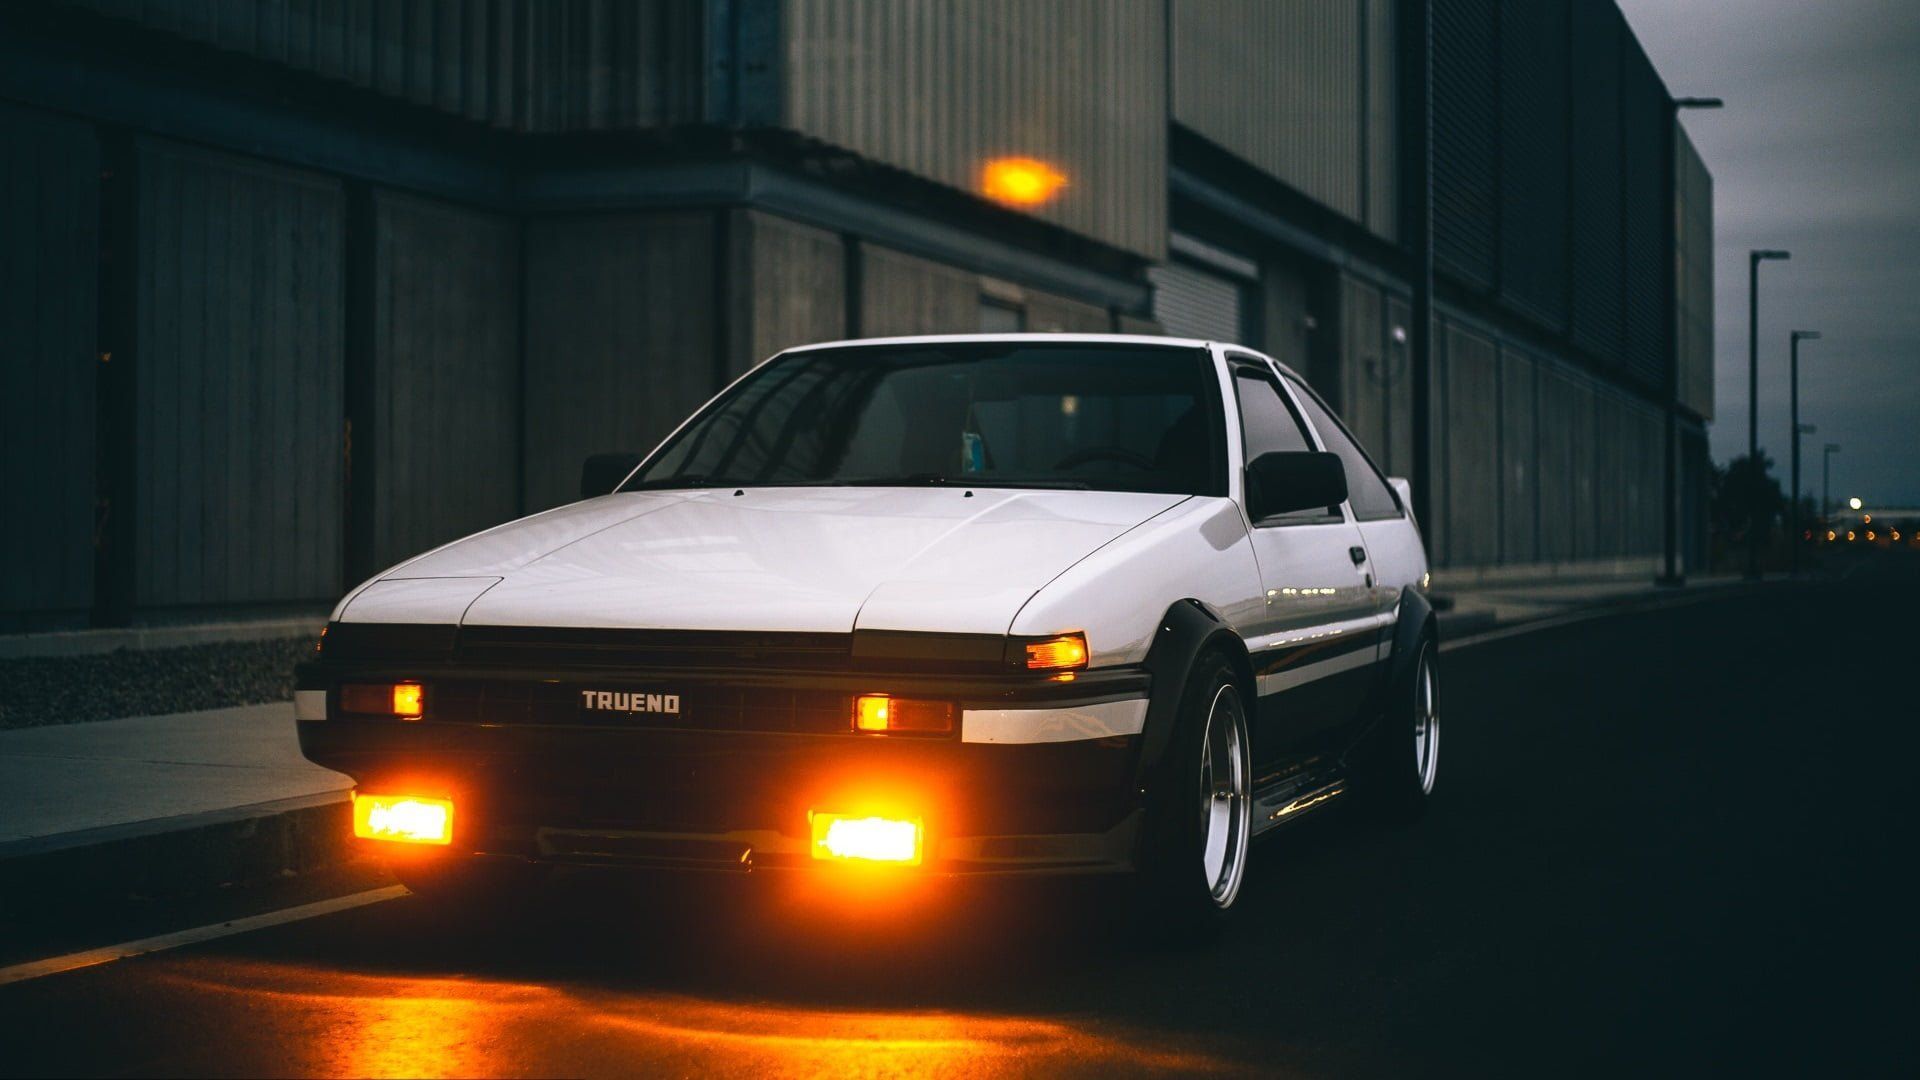 A car with its lights on in the dark - JDM, Toyota AE86